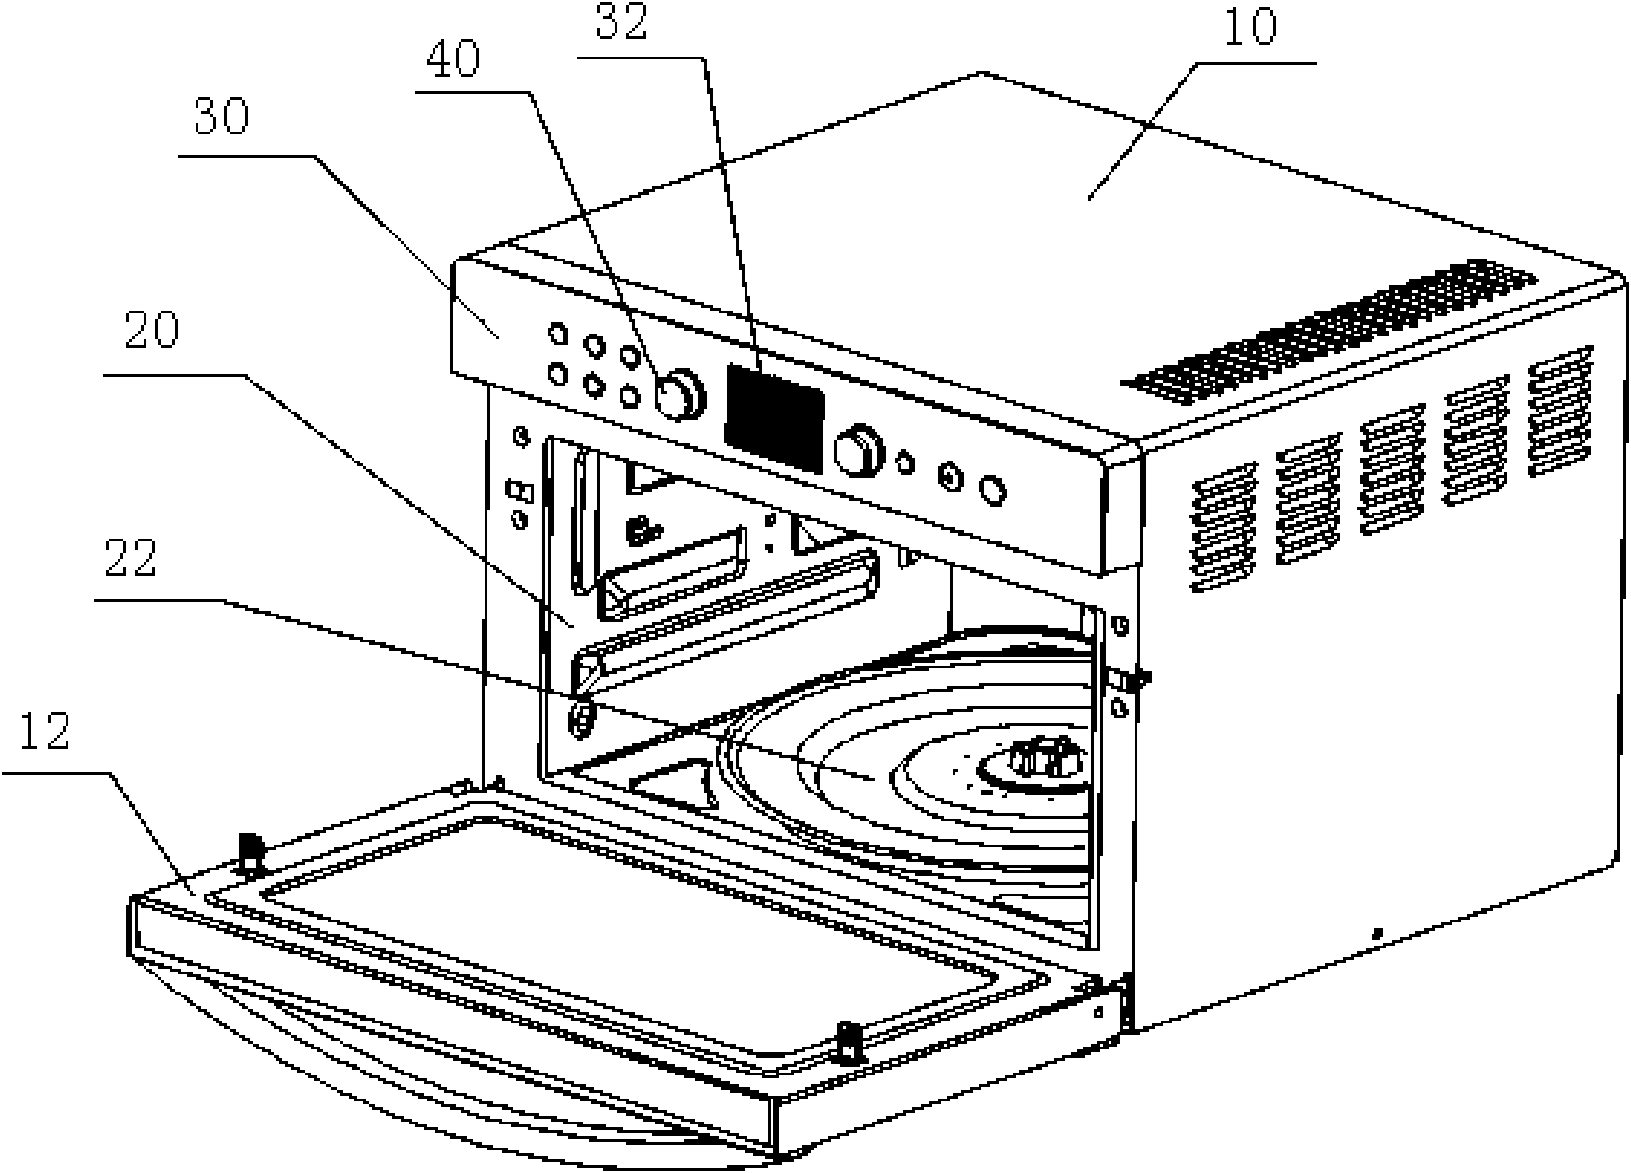 Cooking device internal hot air convection system using cross-flow fan